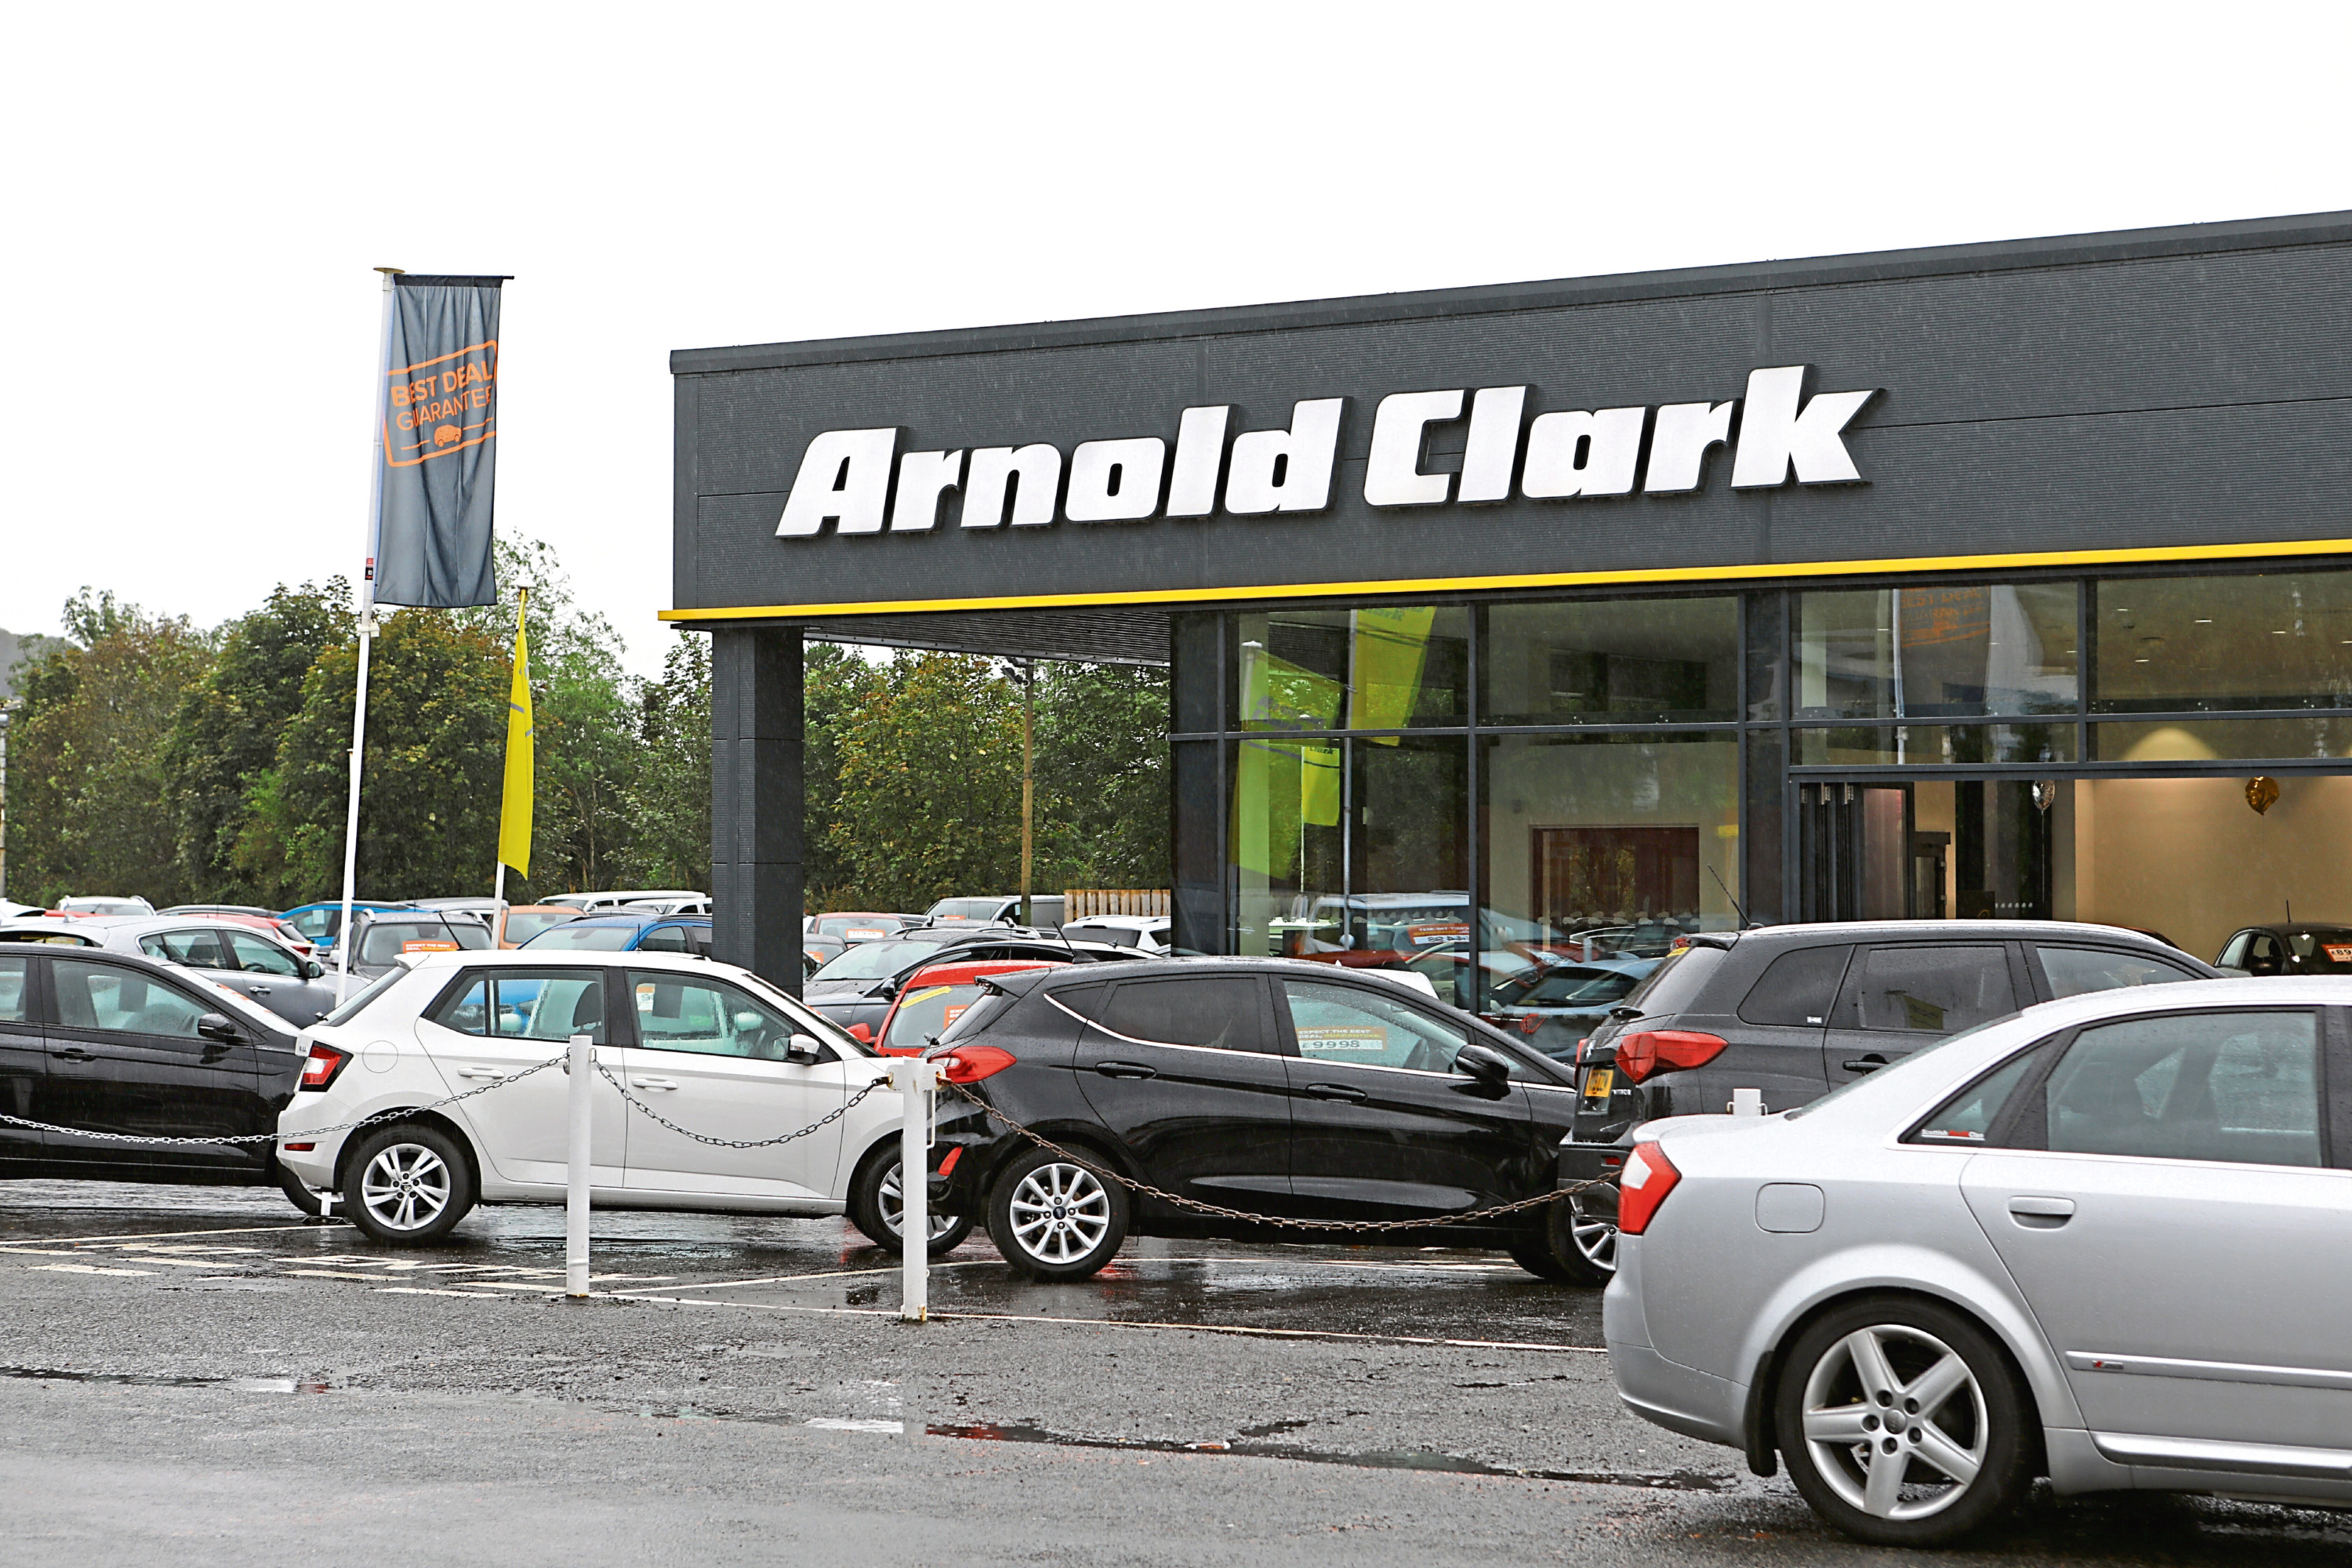 Arnold Clarks dealership on Balfield Road, Dundee.